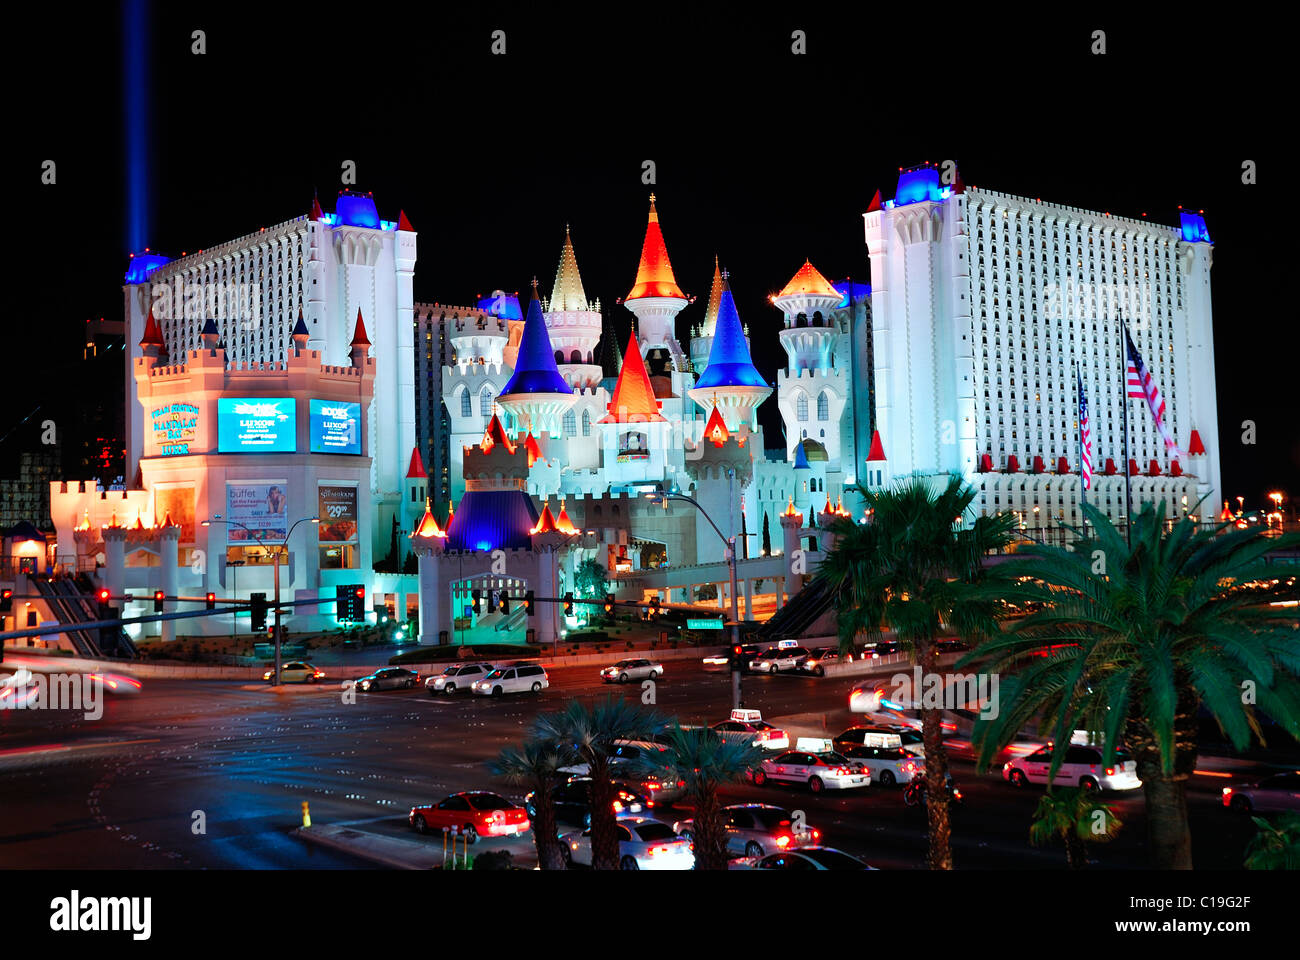 Excalibur Hotel and Casino, Las Vegas at night with busy traffic Stock Photo